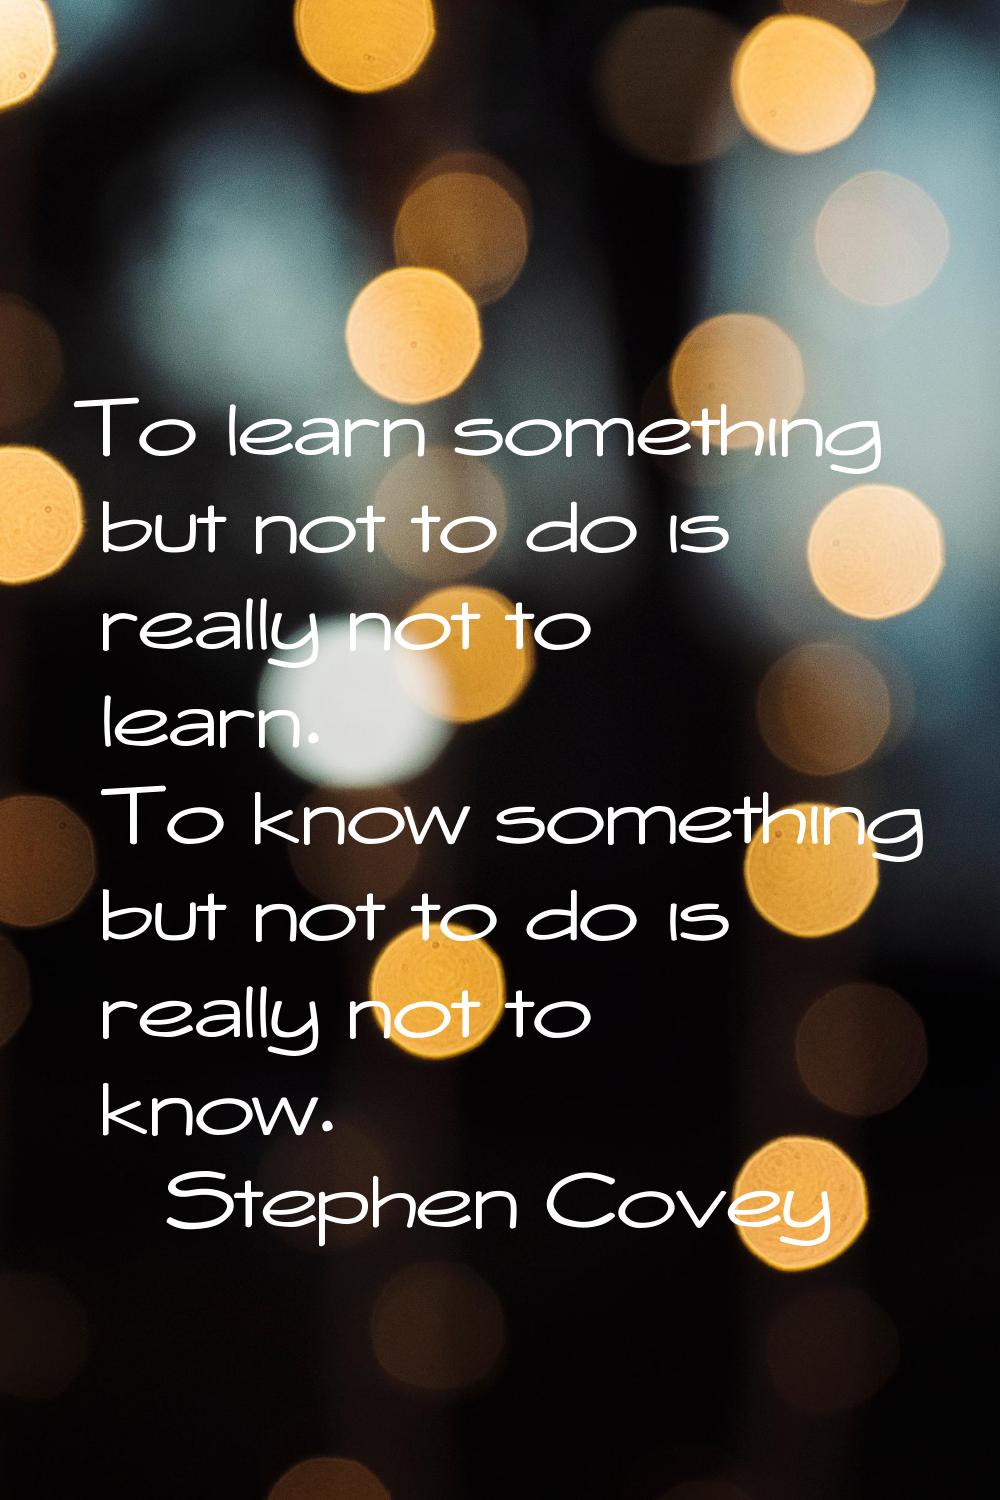 To learn something but not to do is really not to learn. To know something but not to do is really 